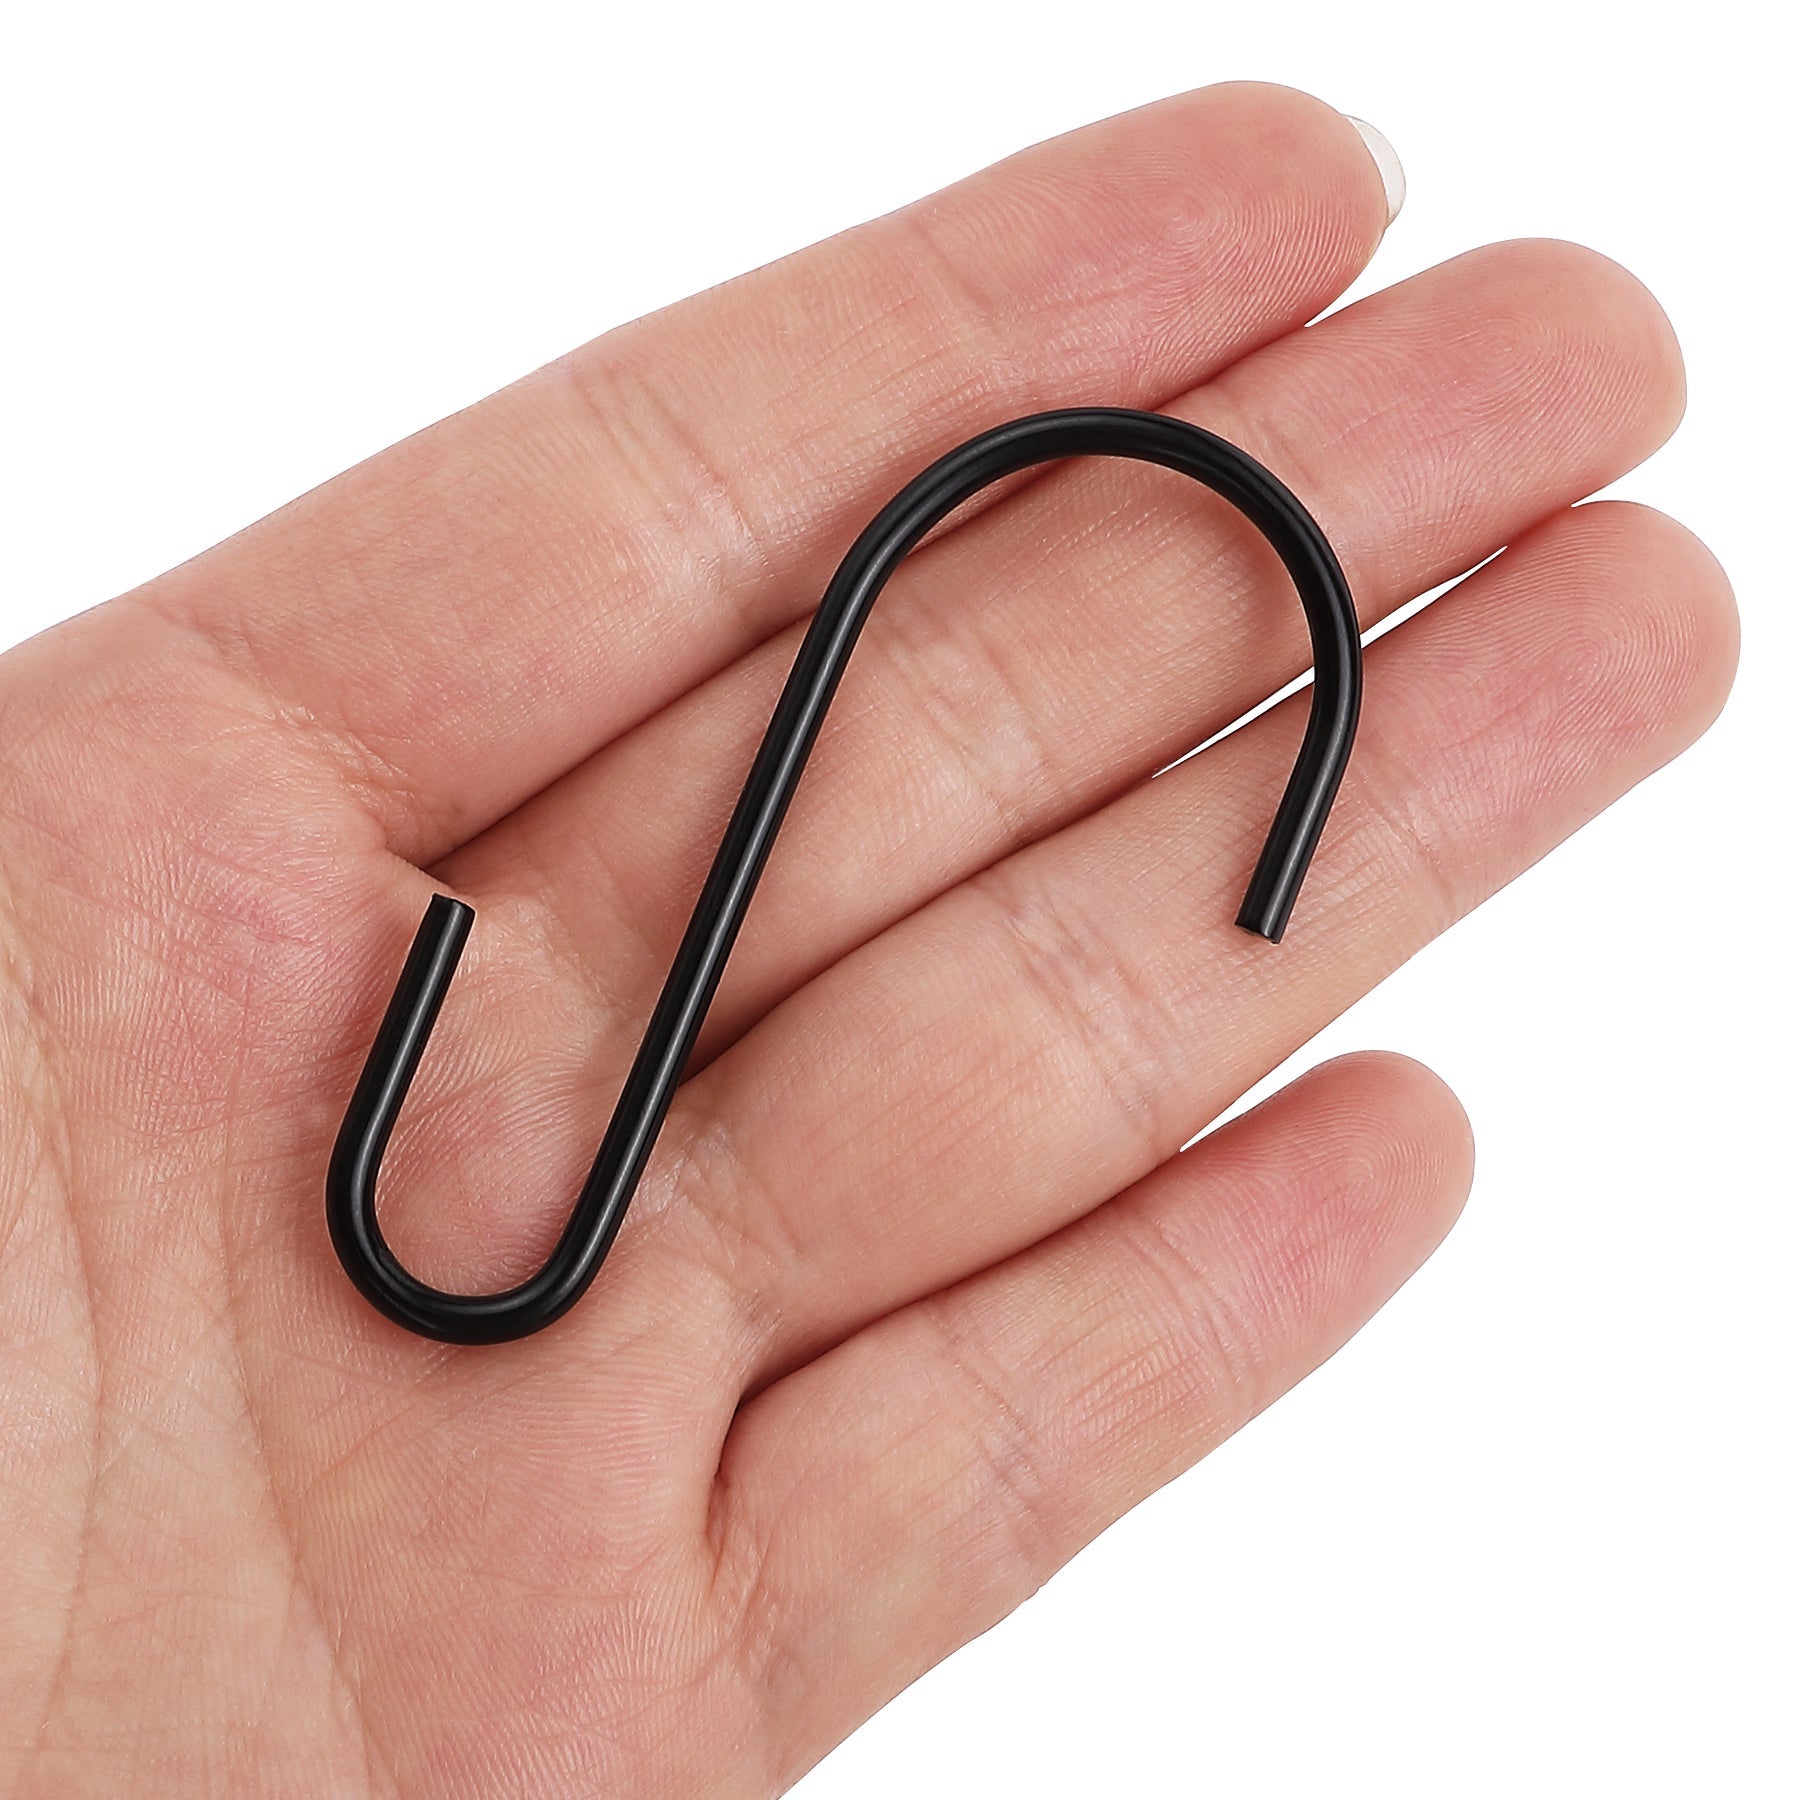 Rivexy 30 Small S Hook Pack - Black Coated, S Hooks for Hanging on Hea